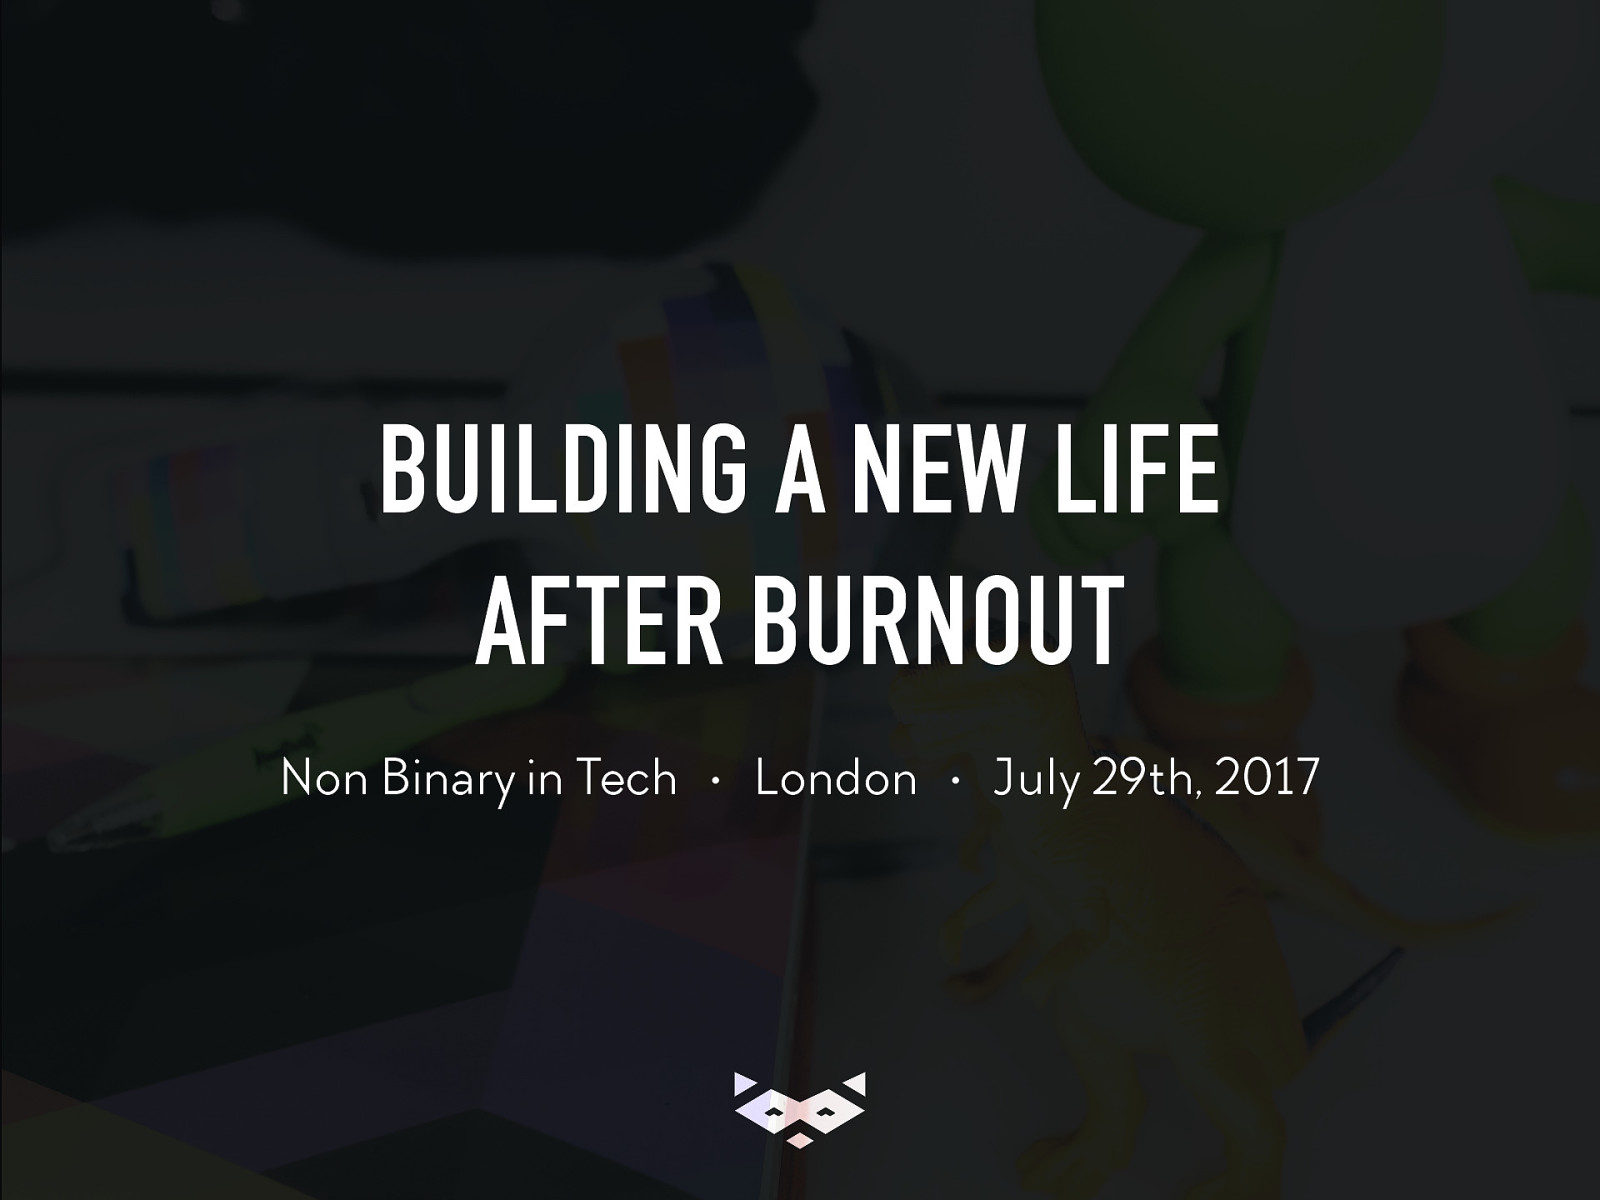 Building a new life after burnout